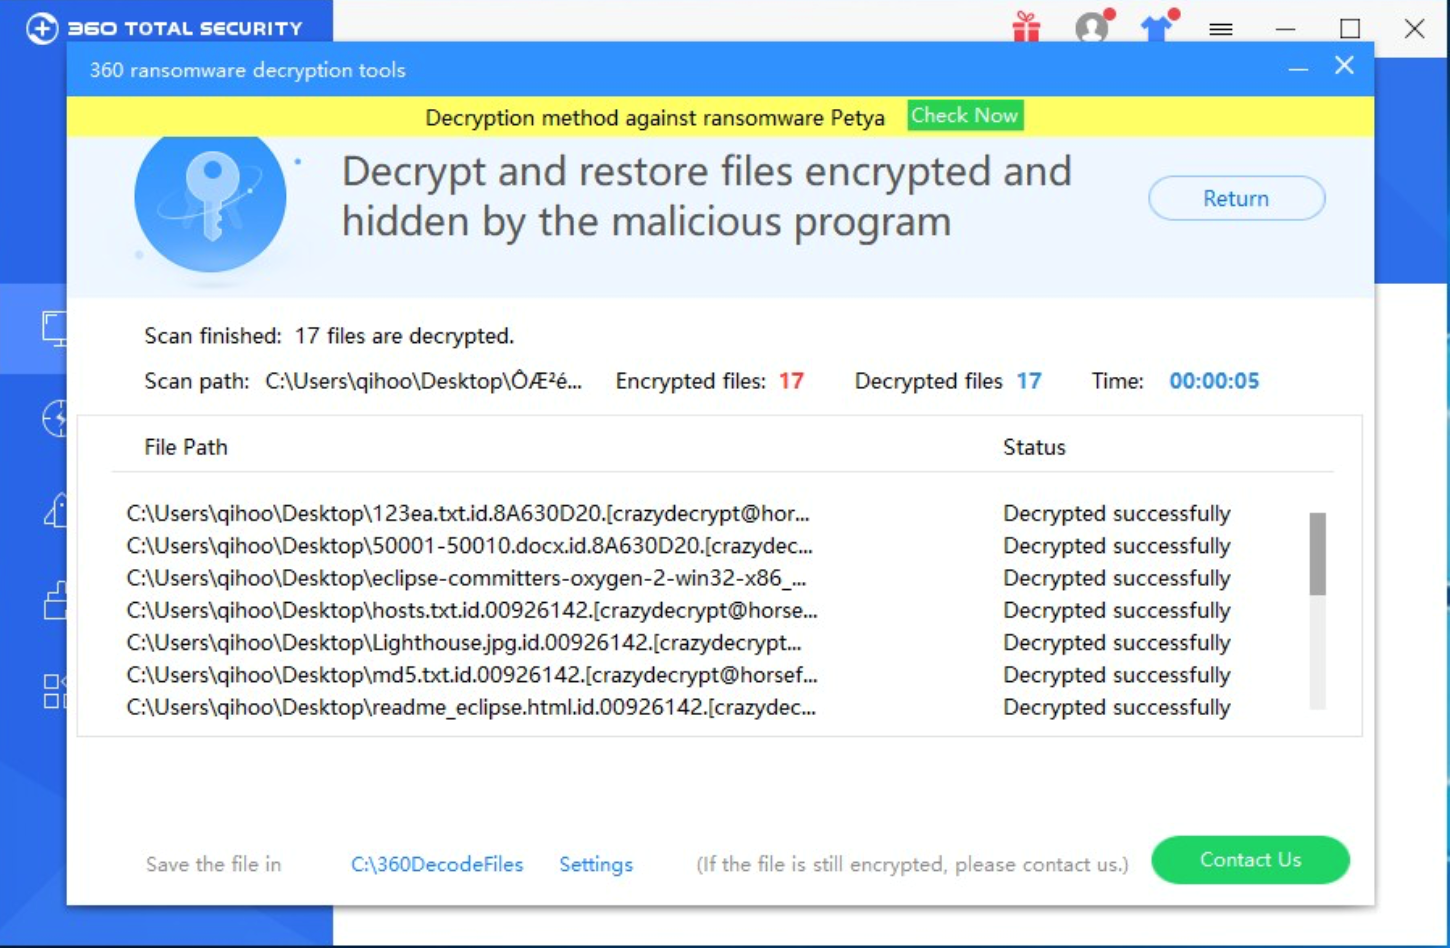 360 Total Security First support decrypting CrazyCrypt 2.1 Ransomware